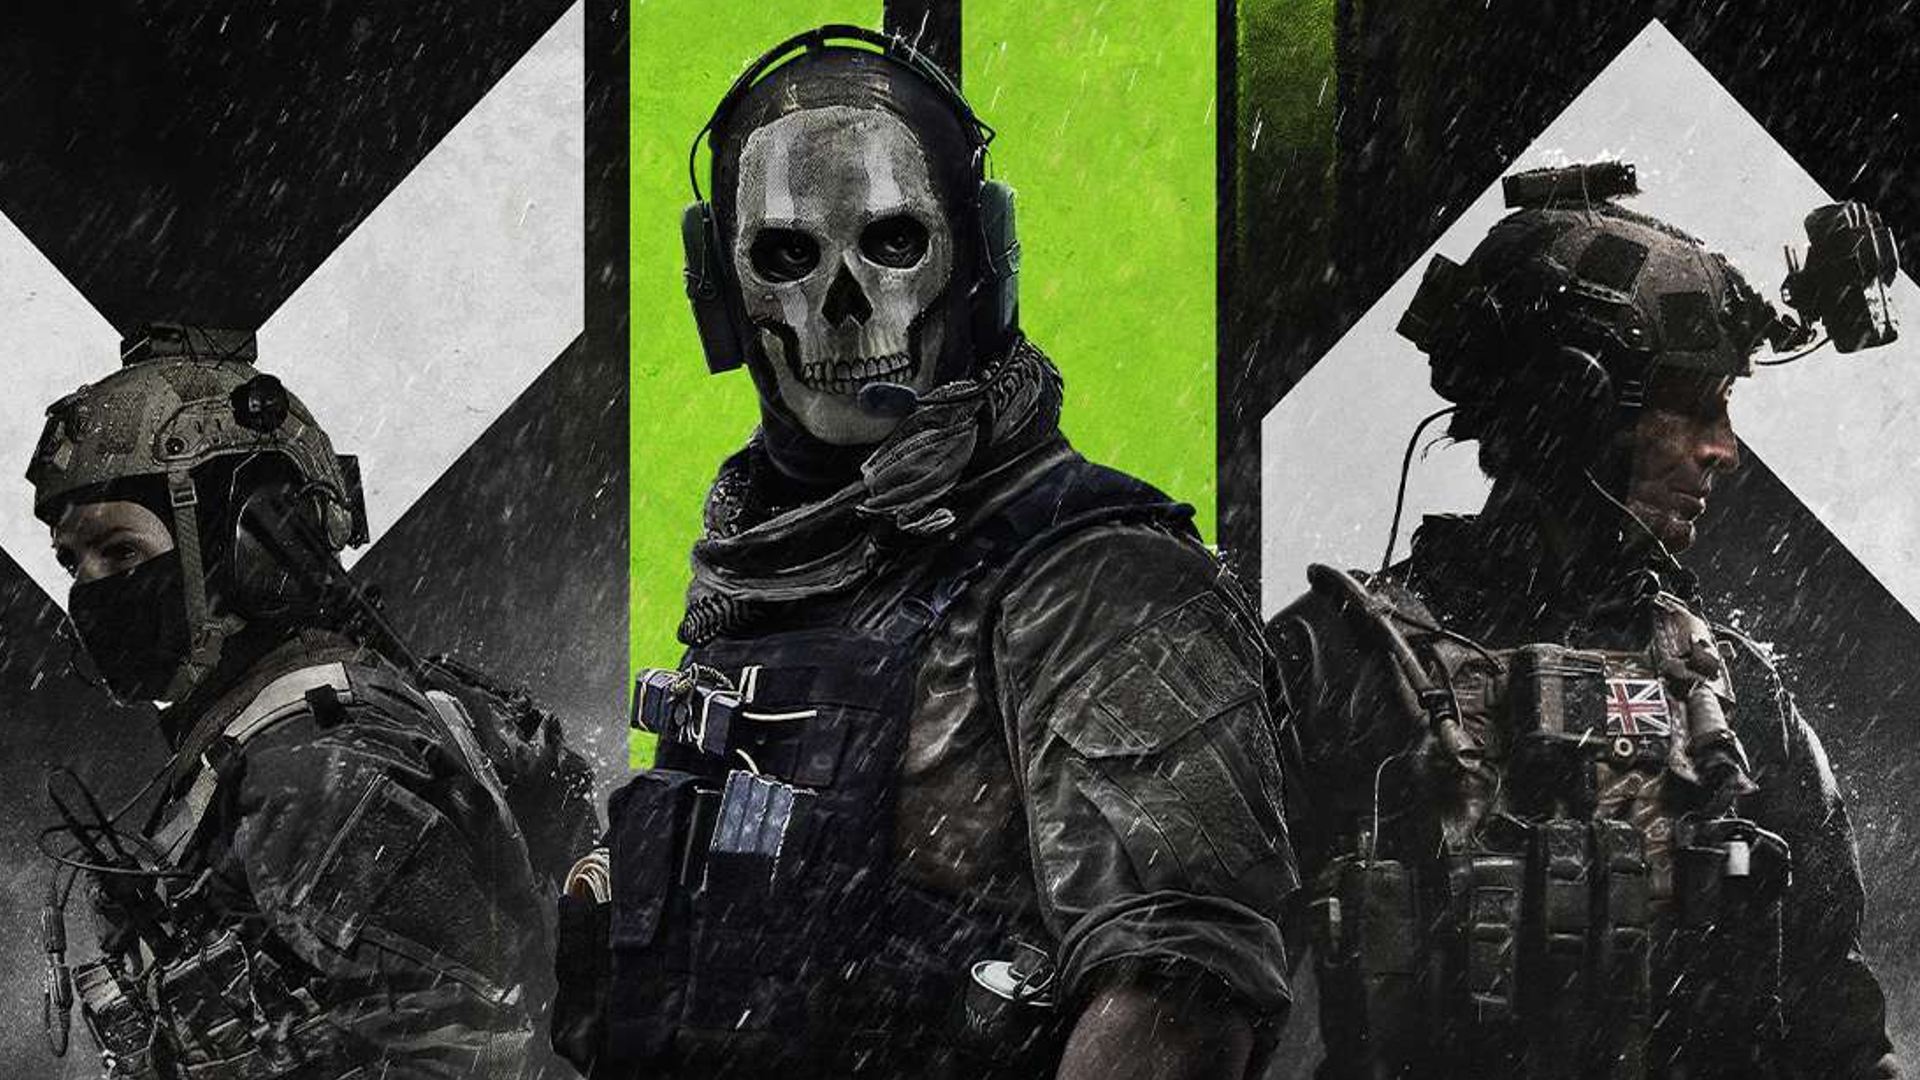 Call of Duty: Modern Warfare 2 multiplayer revealed - here's the details